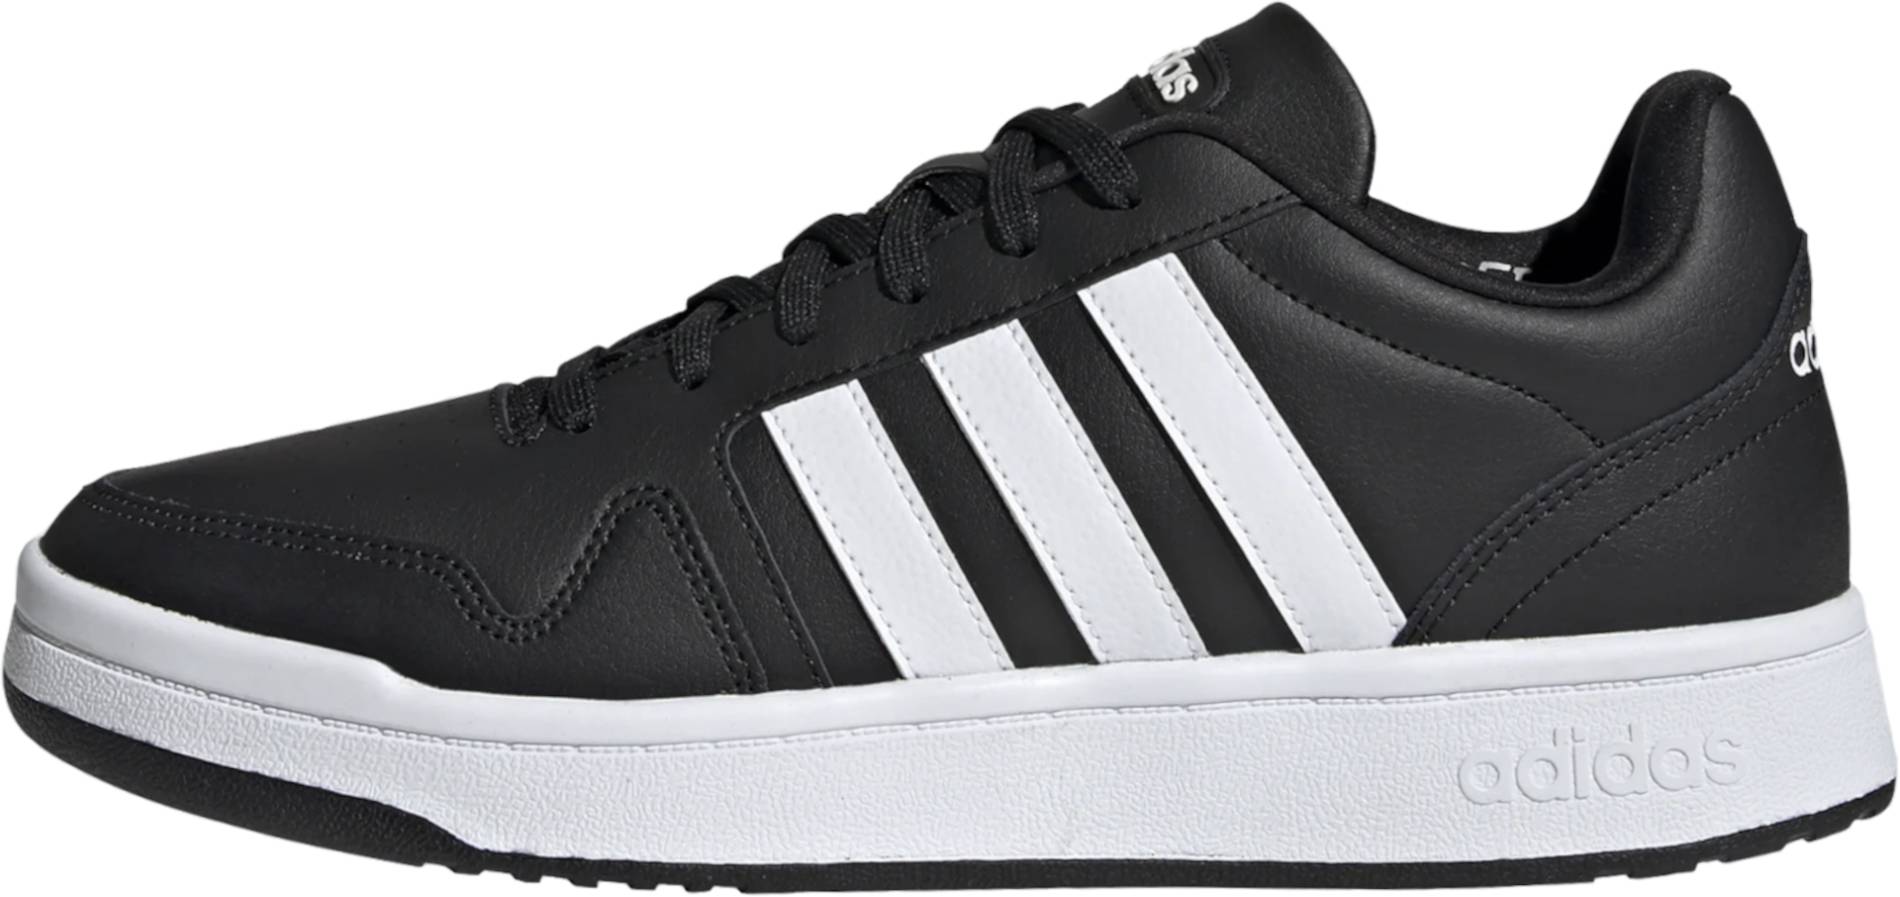 Adidas Postmove Review, Facts, Comparison |